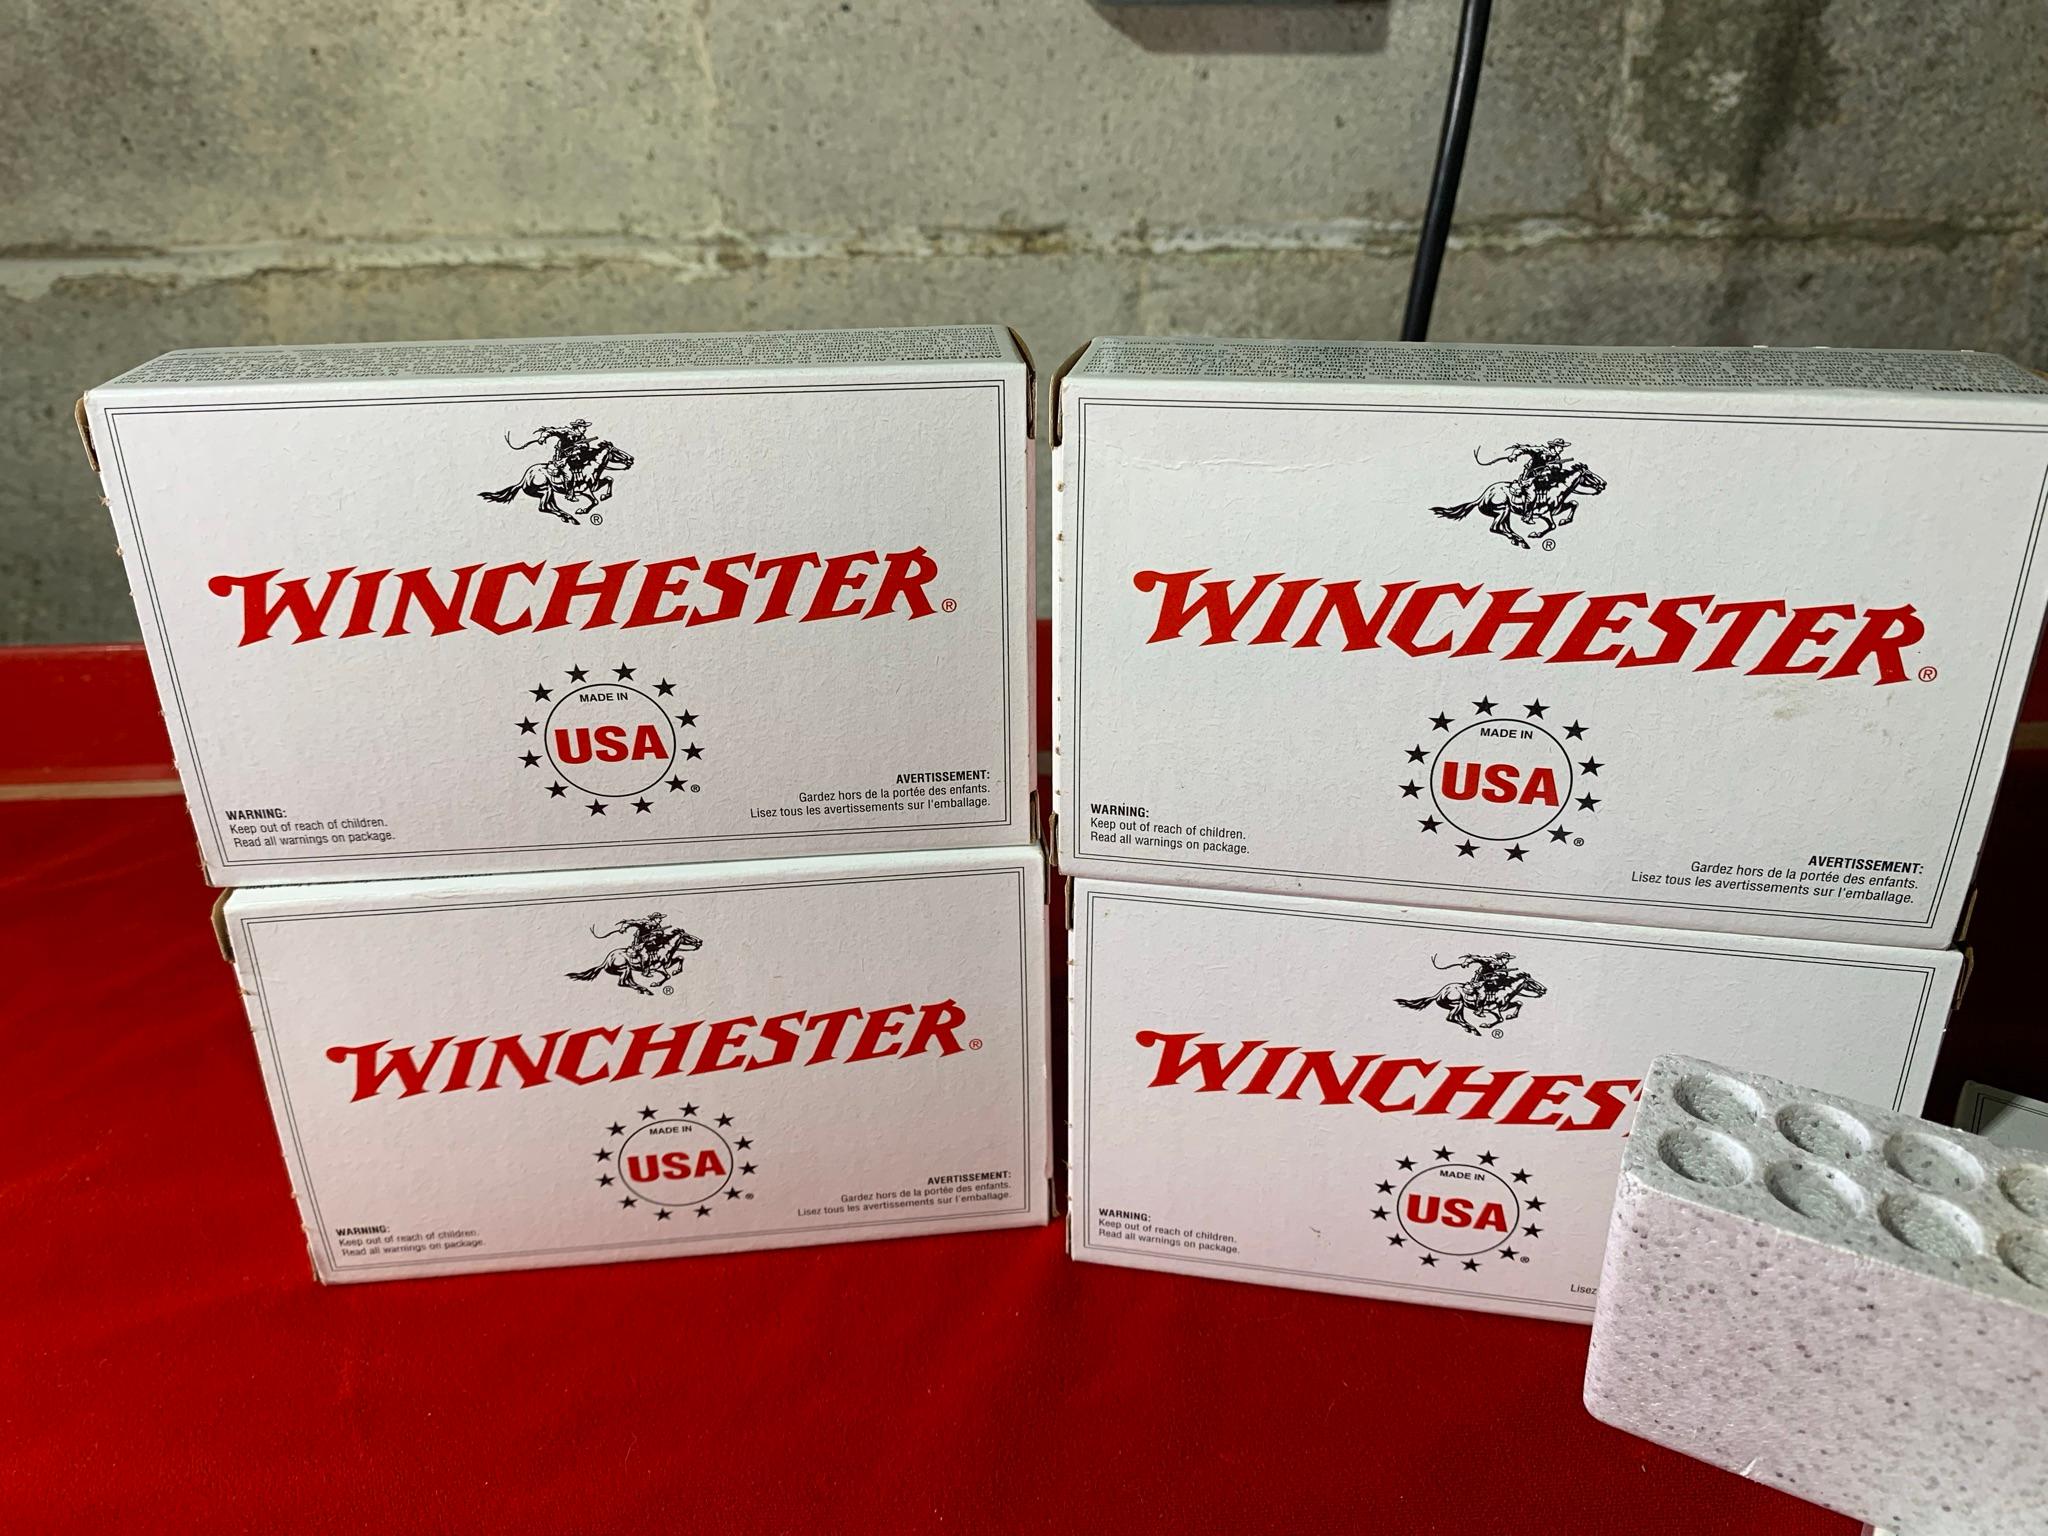 4 Full Boxes of Winchester 7.62mm 147 Grain Full Metal Jacket Ammunition.  Additional Half Box